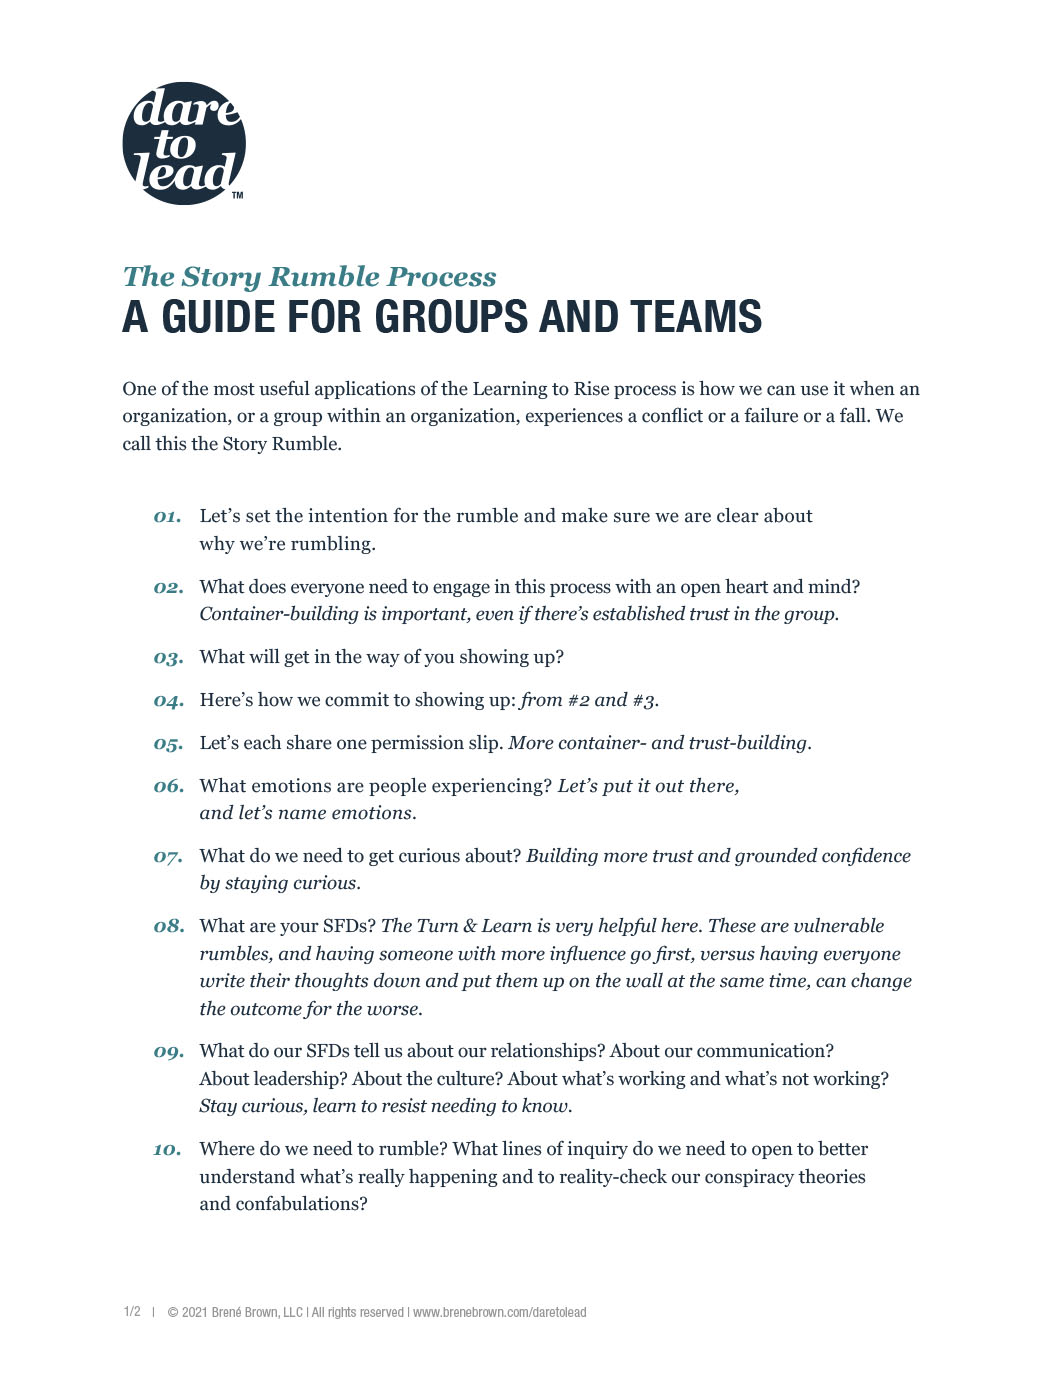 Dare to Lead The Story Rumble Process: A Guide for Groups and Teams